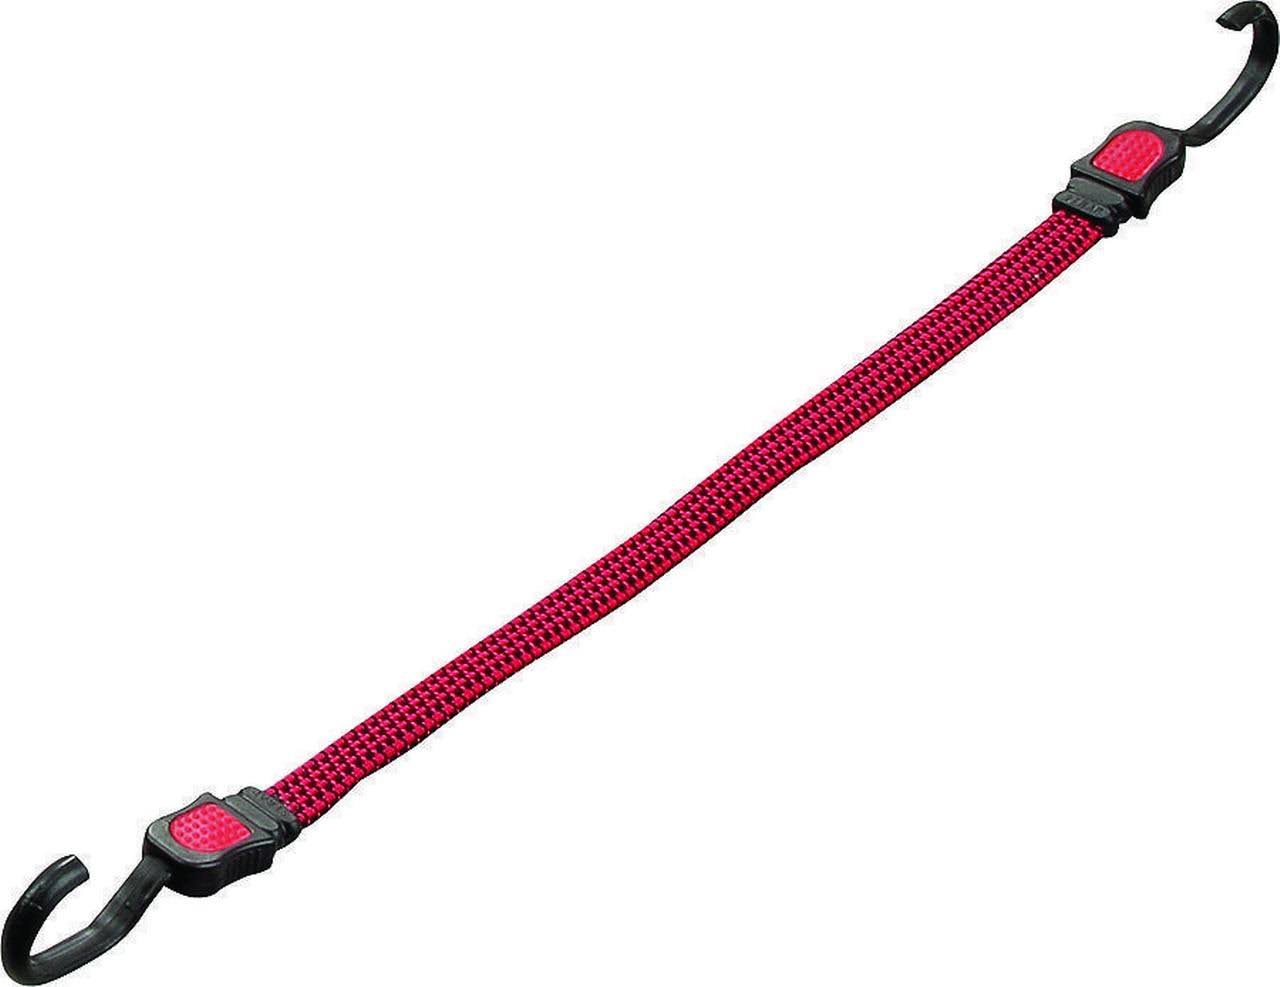 MintCraft Flat Bungee Cord - Red, 17mm x 15in